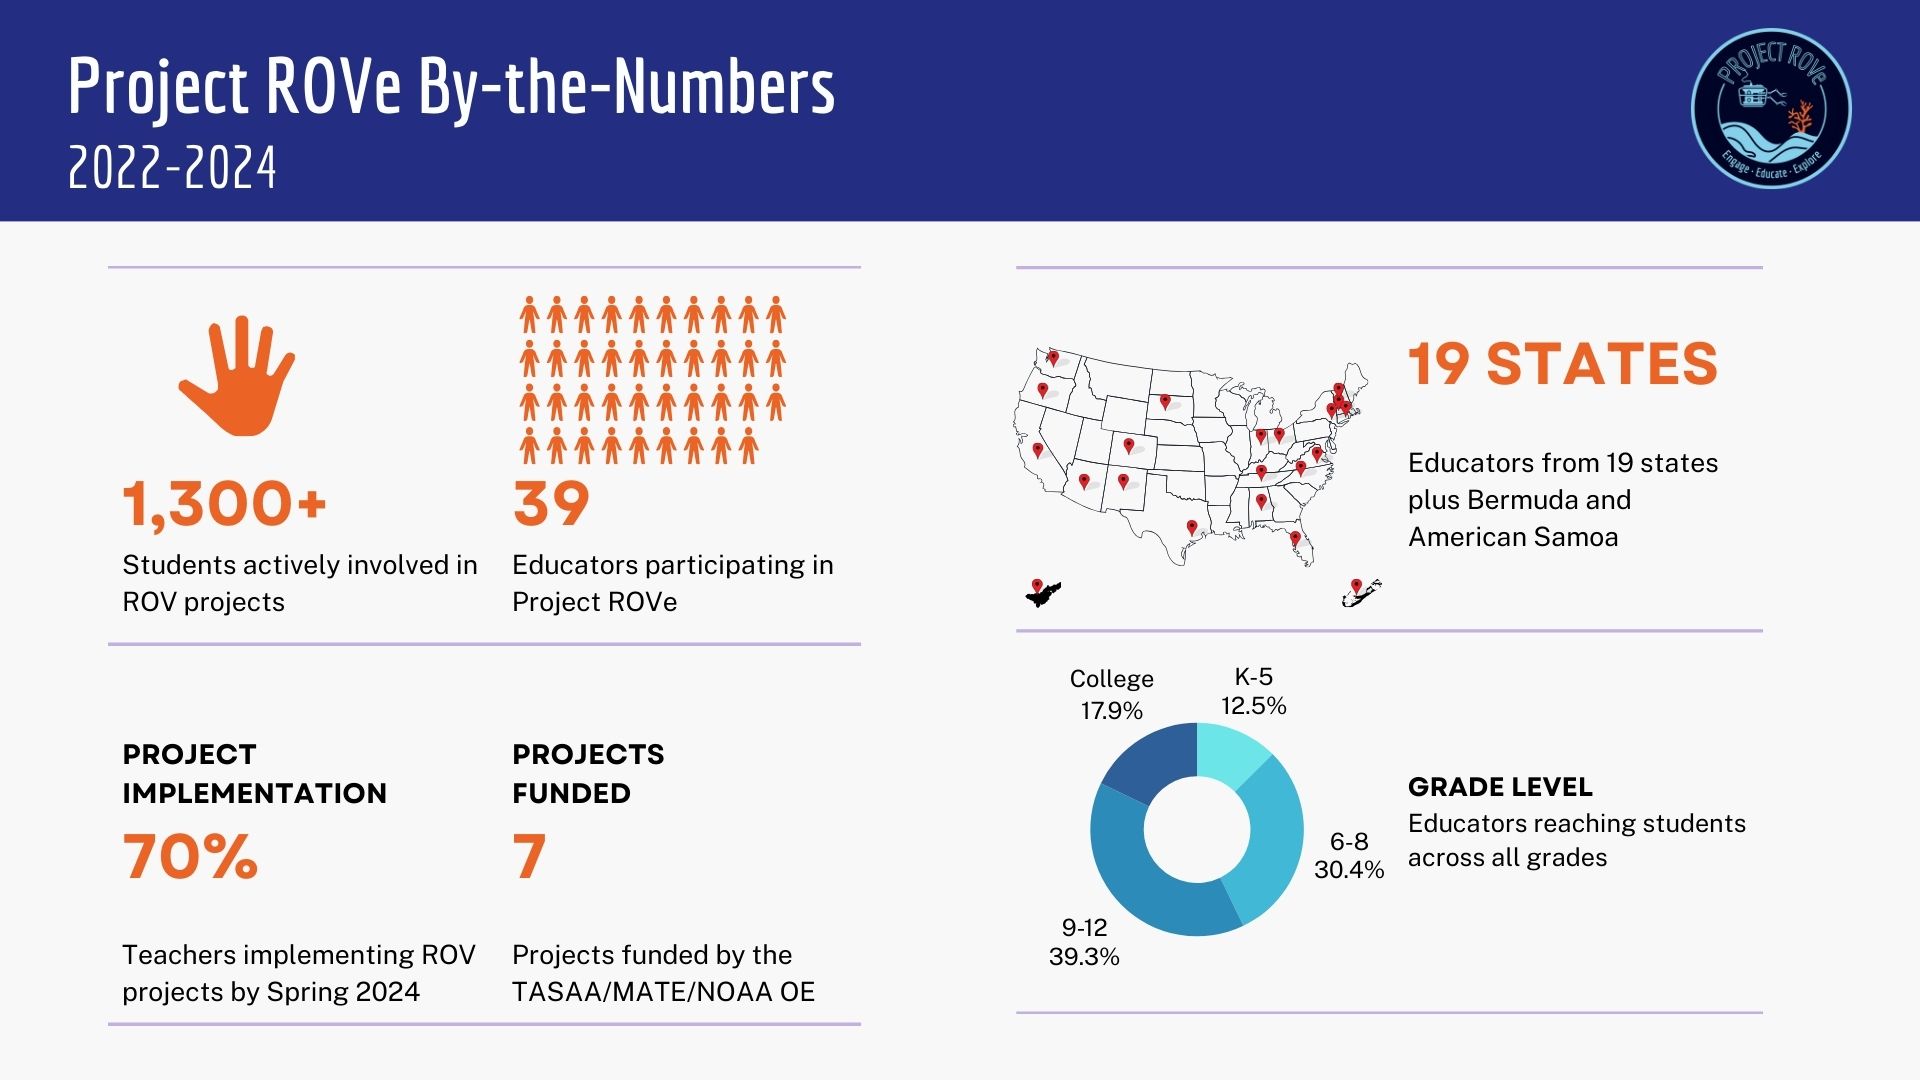 An infographic titled "Project ROvE By-the-Numbers 2022-2024", showcasing student and educator involvement, geographic distribution, project funding, and grade levels impacted. Over 1300 students, 39 educators, and 19 states plus 2 American Samoa are involved. 70% project implementation, 7 funded projects, and 93.3% of educators in grades K-12 are highlighted.